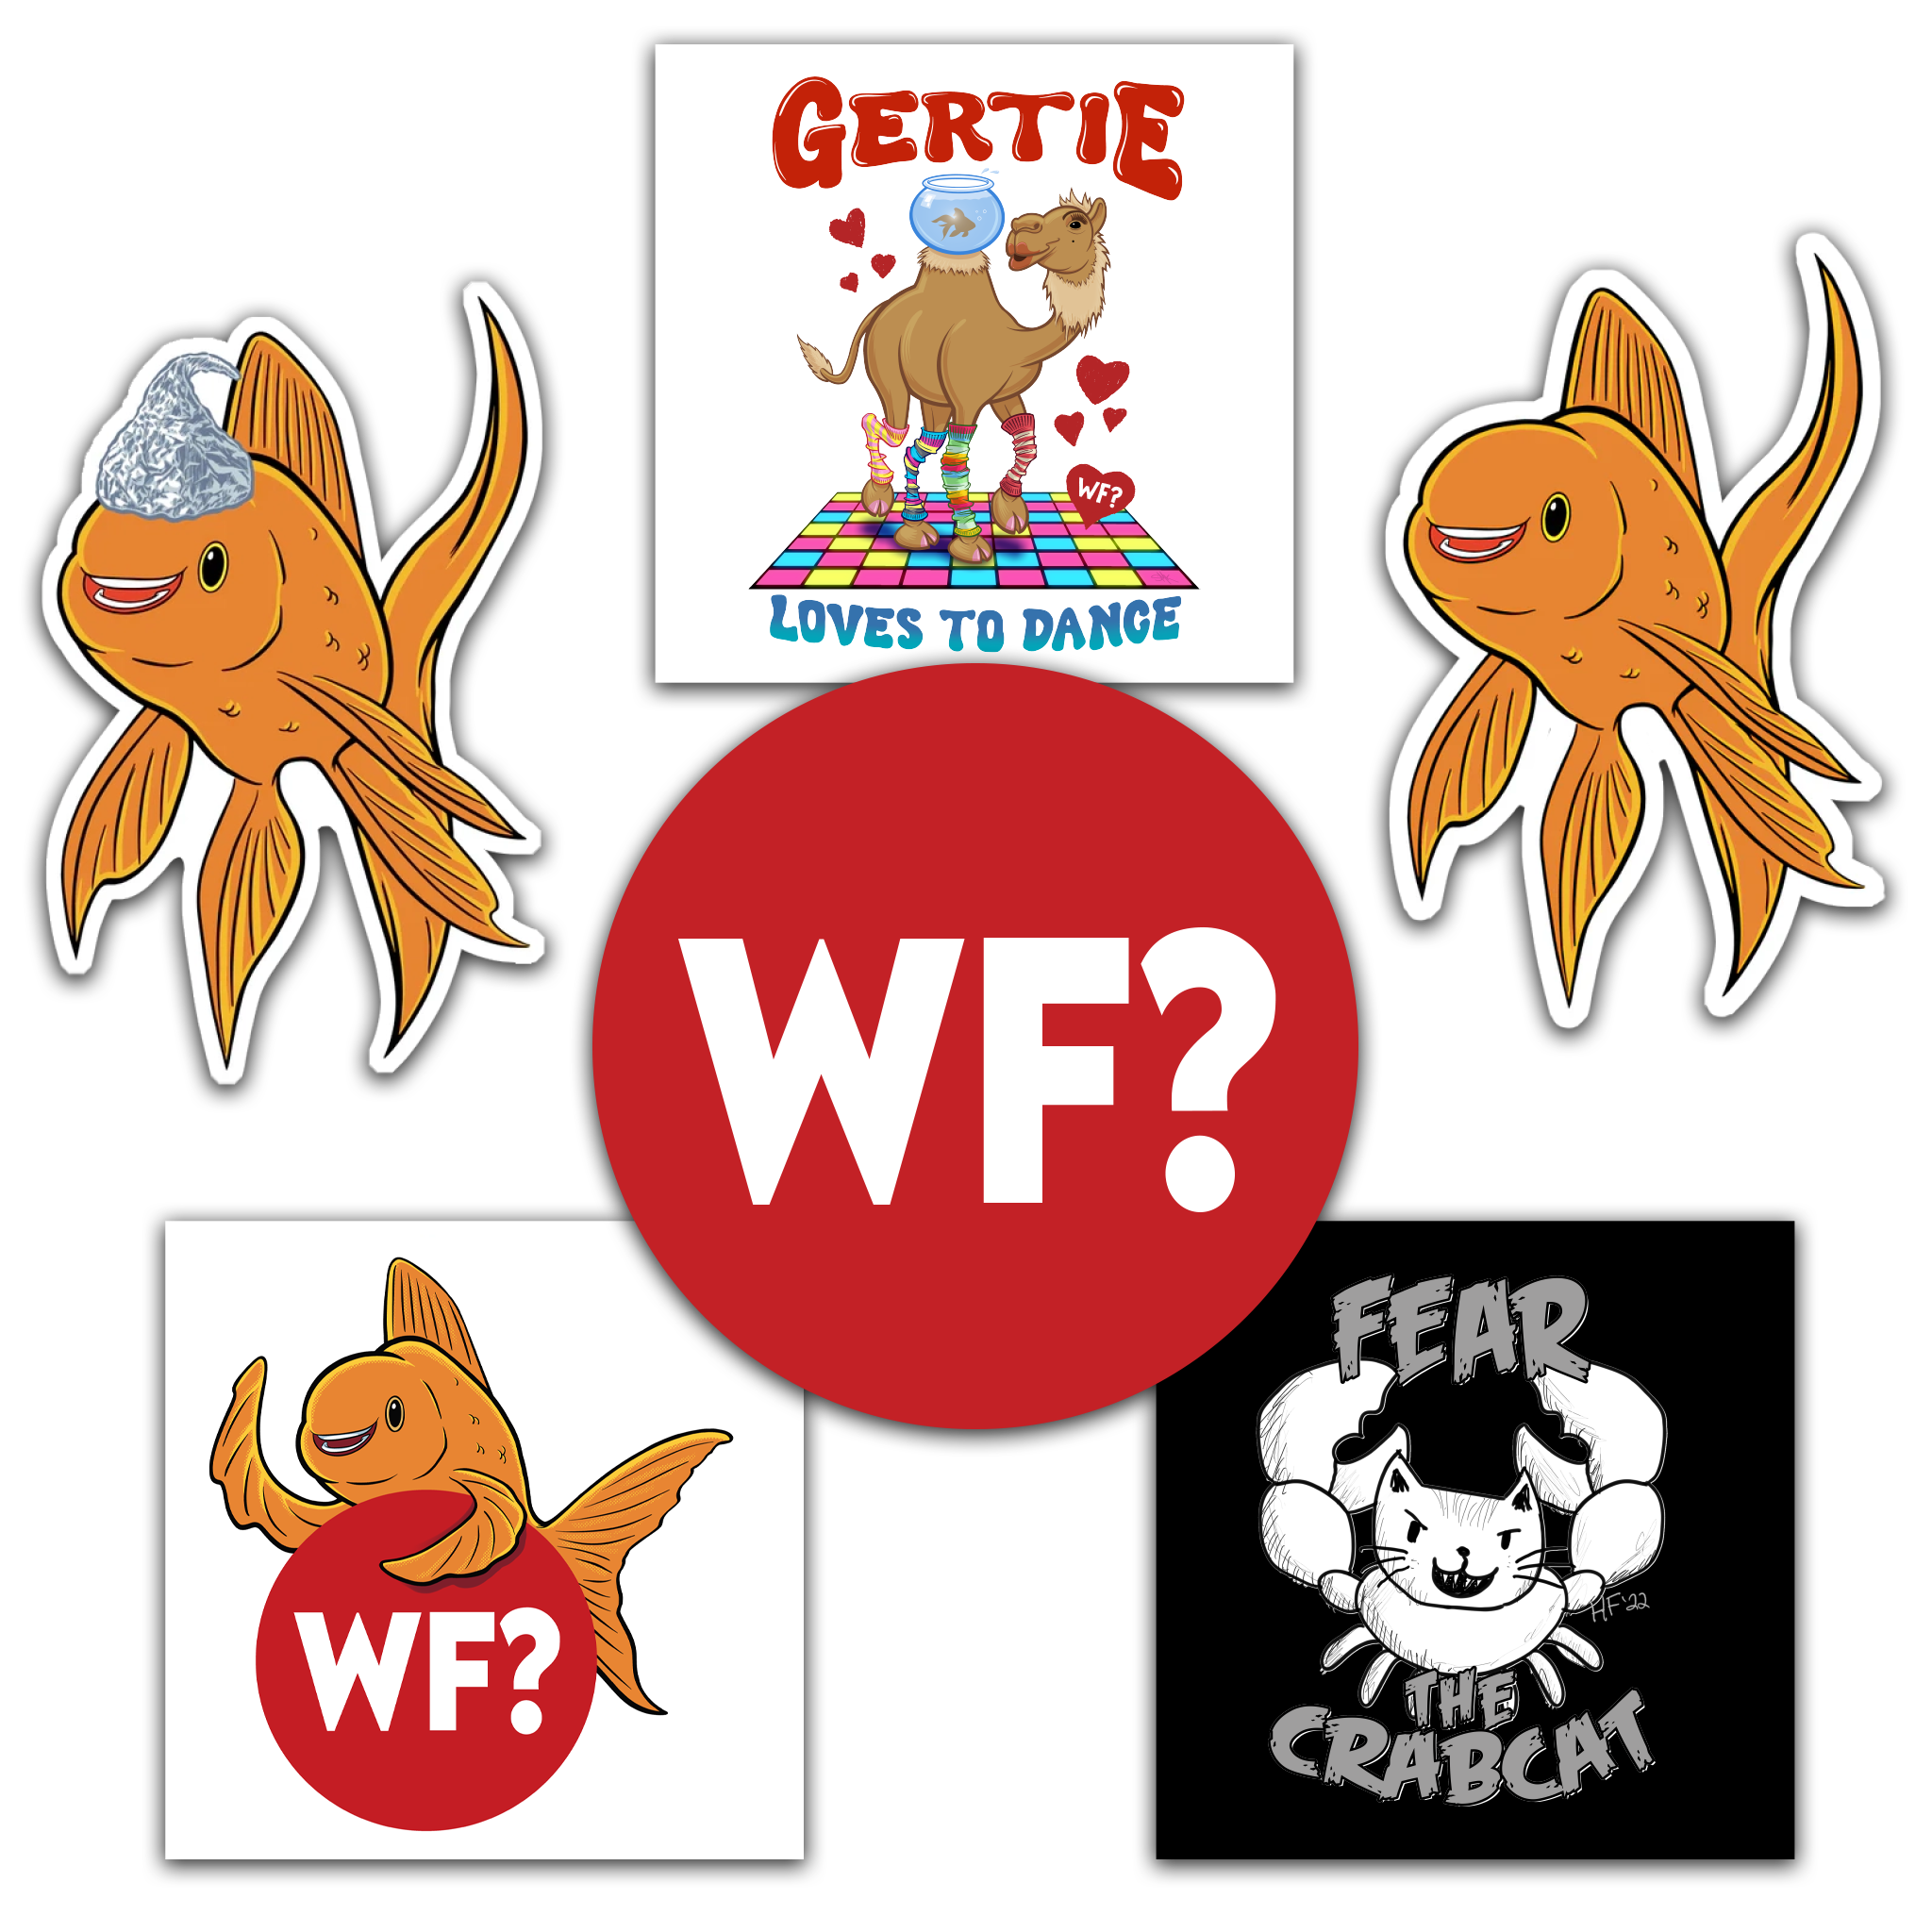 TWF STICKER PACK!!! All Six for a great price!